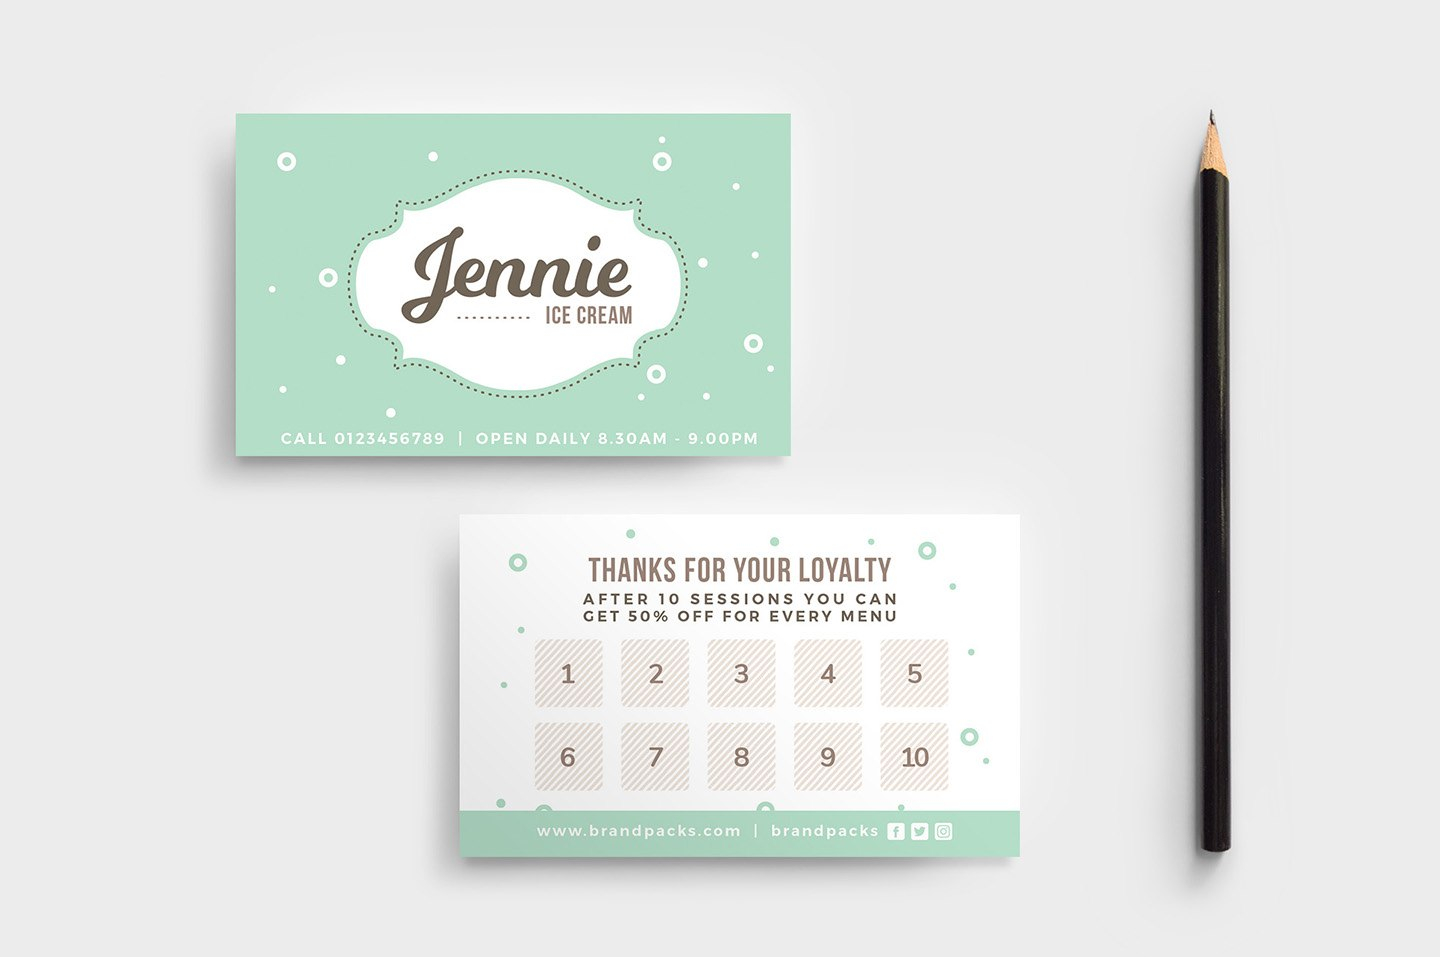 Free Loyalty Card Templates  Psd Ai  Vector  Brandpacks within Loyalty Card Design Template